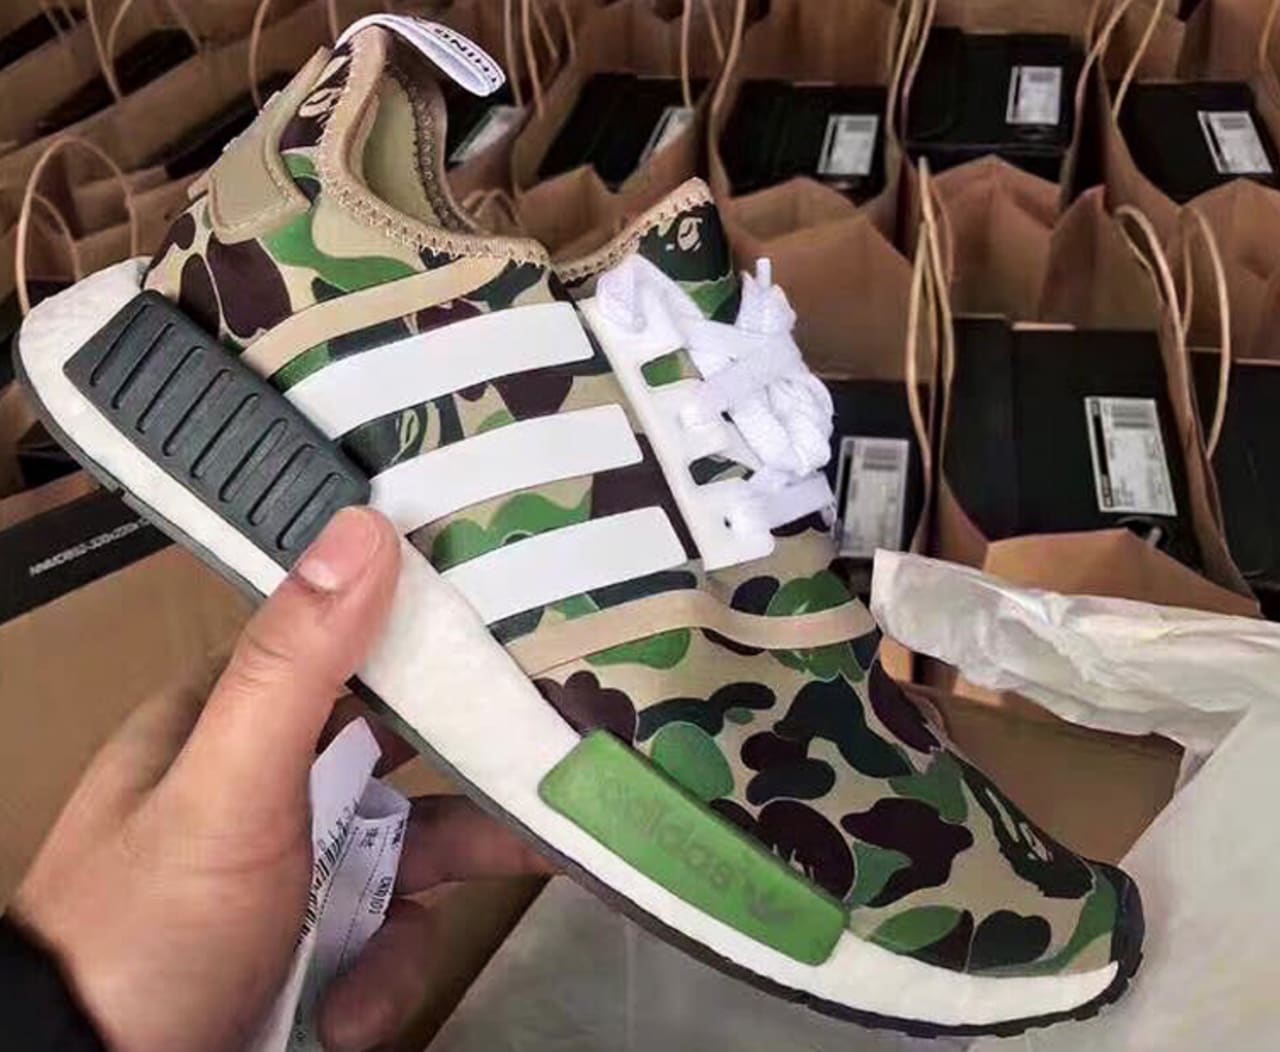 Escribe email violación biología The Bape x Adidas NMD Release Was What's Wrong With Sneakers in 2016 |  Complex